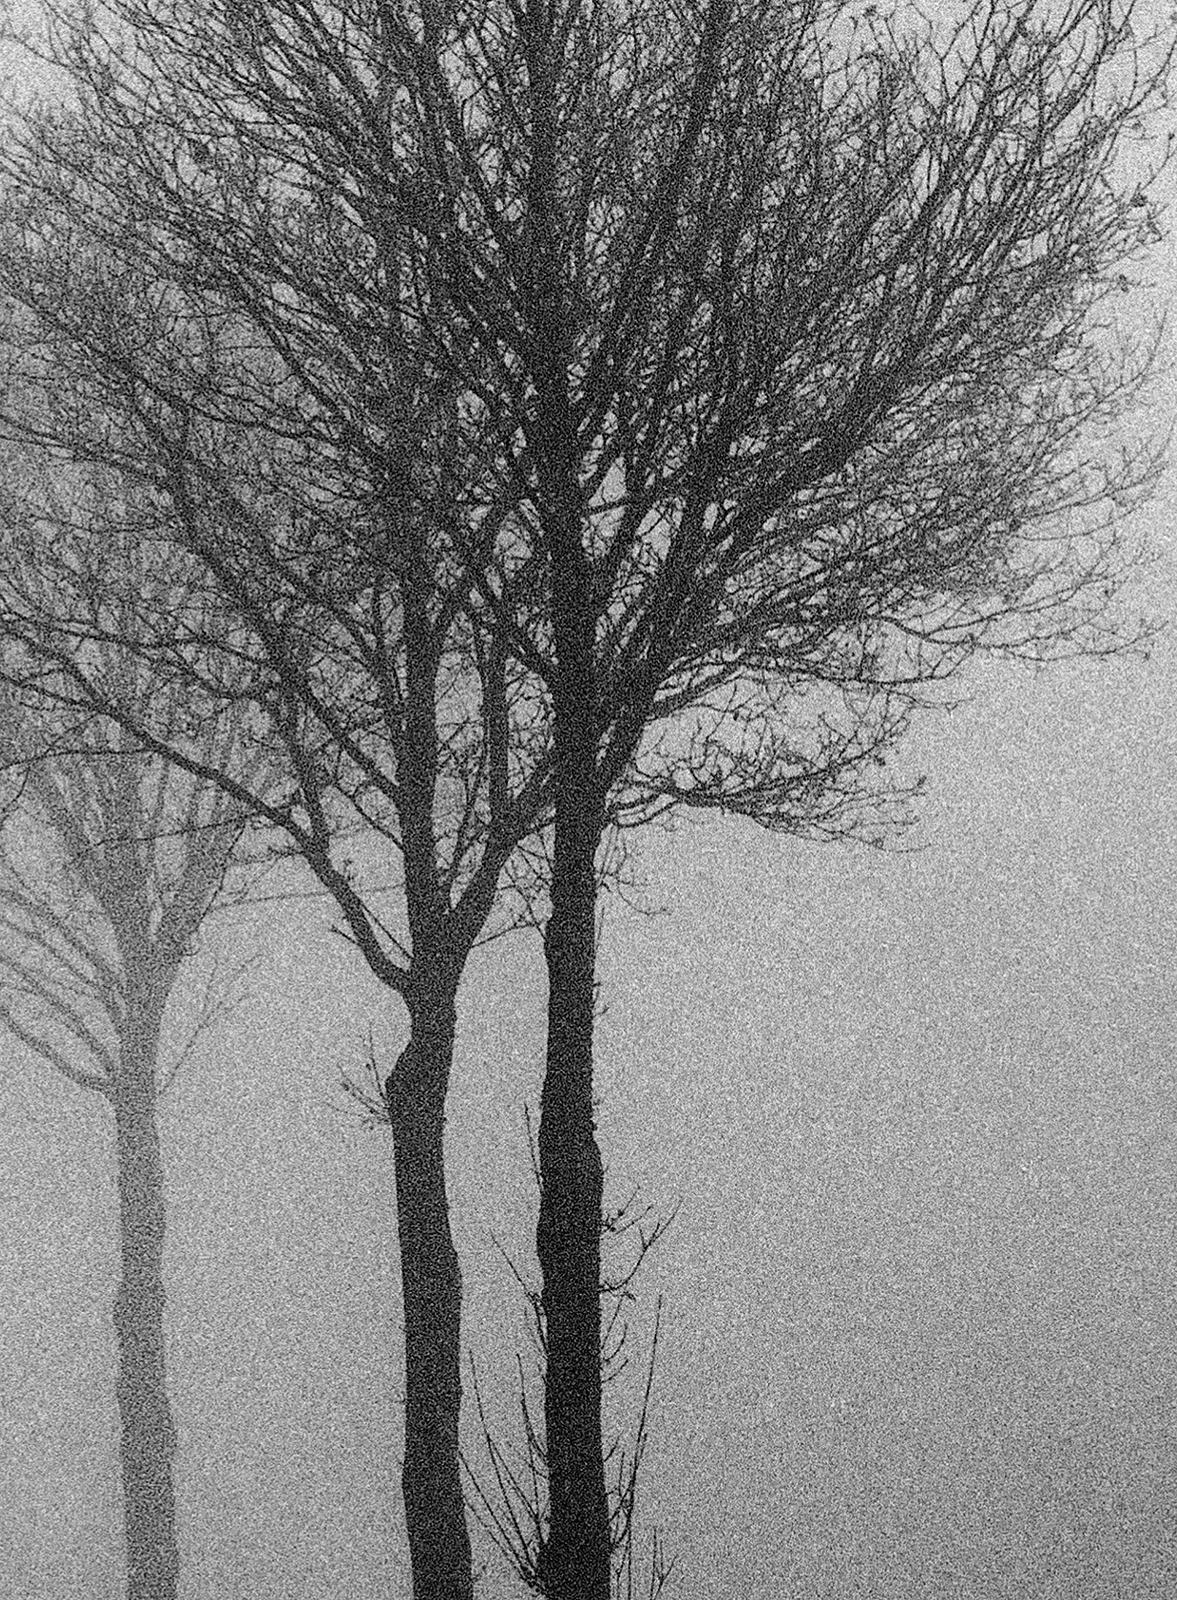 3 Trees -Signed limited edition nature print, Black white photo, Tree in mist  - Photograph by Ian Sanderson